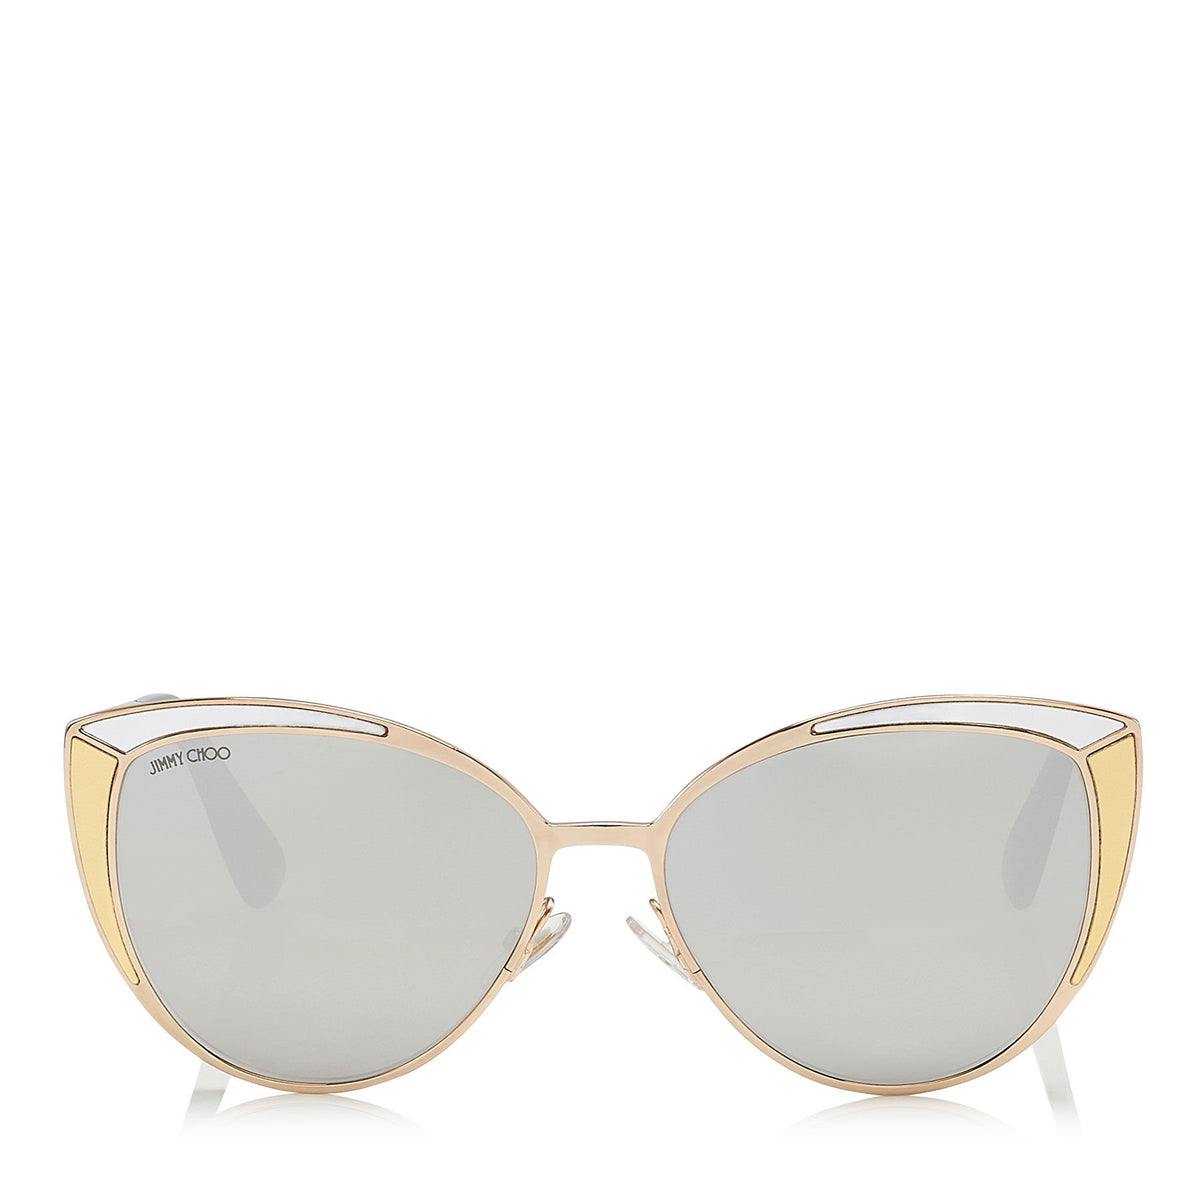 JIMMY CHOO Domi Metal Framed Cat Eye Sunglasses with Silver and Gold Leather Detail ITEM NO. DOMIS56EVNG